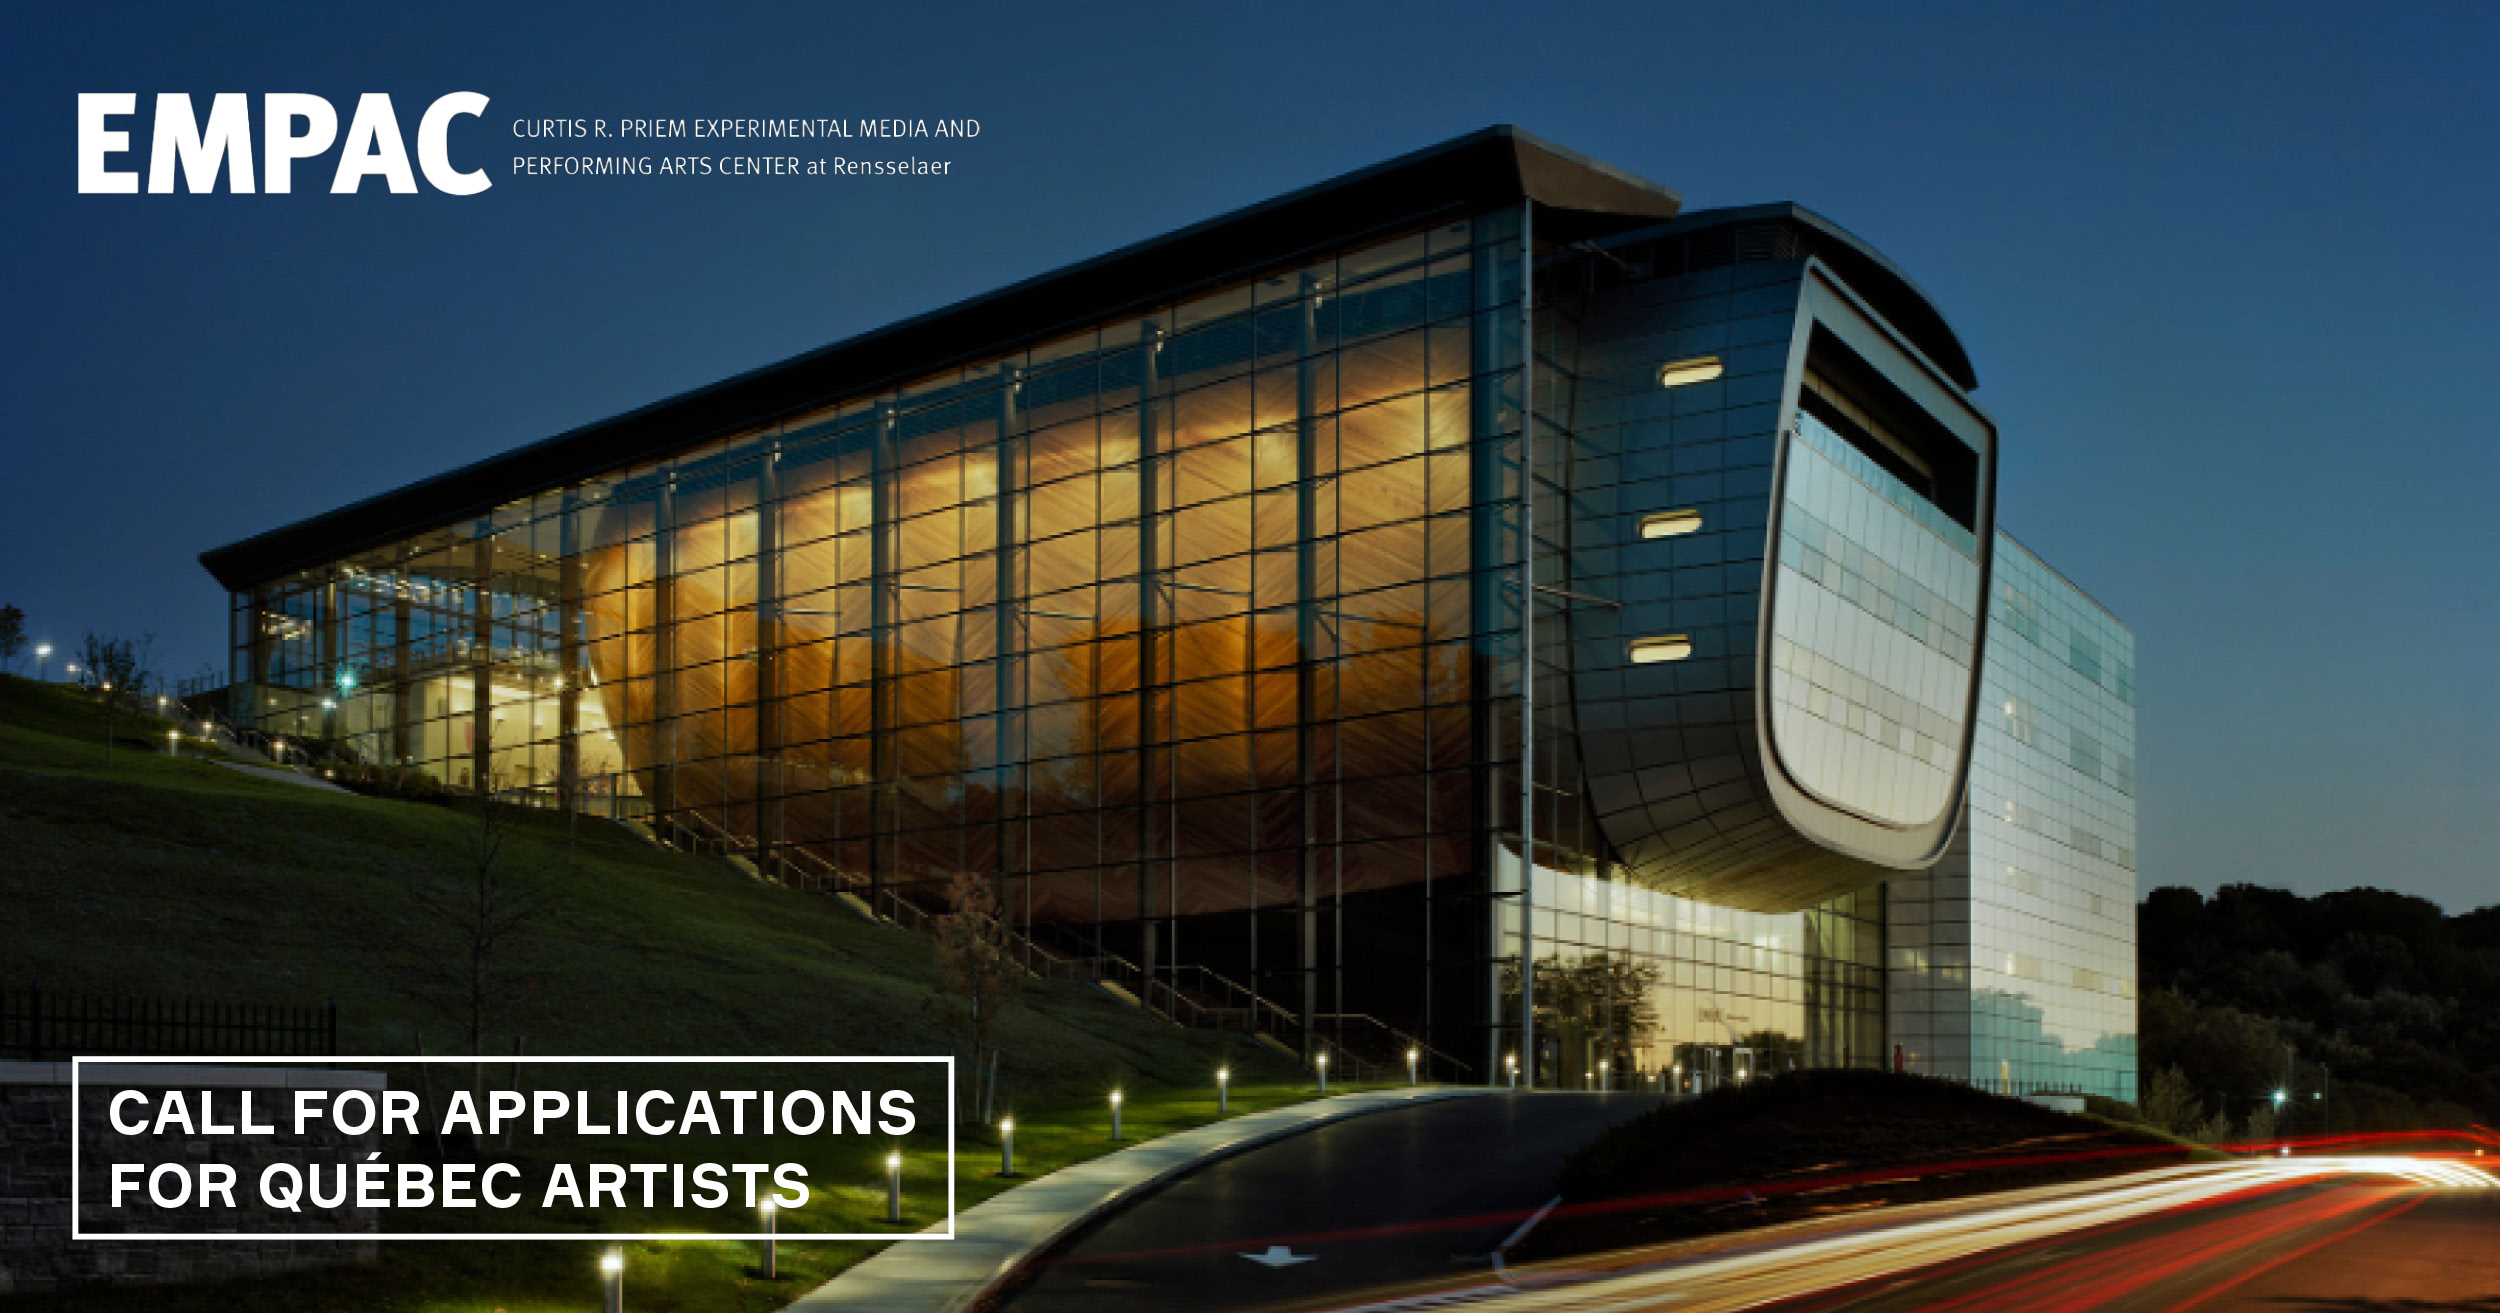 The exterior of EMPAC as cars blurred in motion pass not he street below, call for applications for Quebec artists, EMPAC 